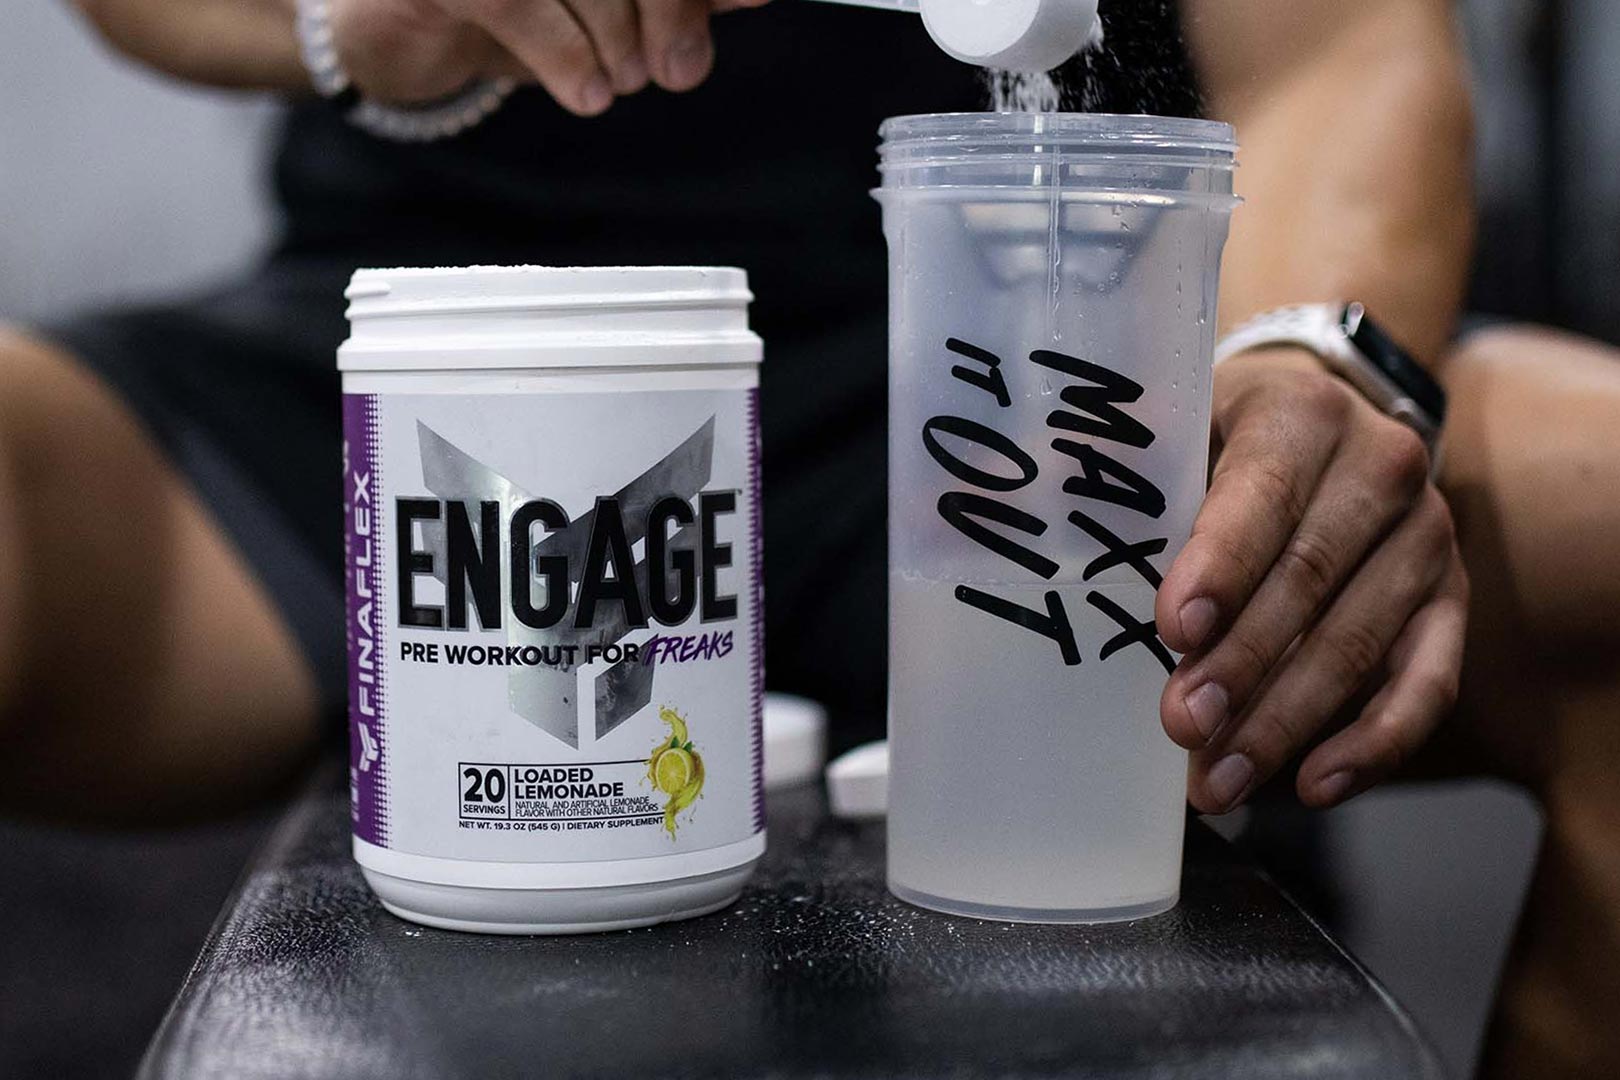 Finaflex packs some high dosages in its Engage pre-workout